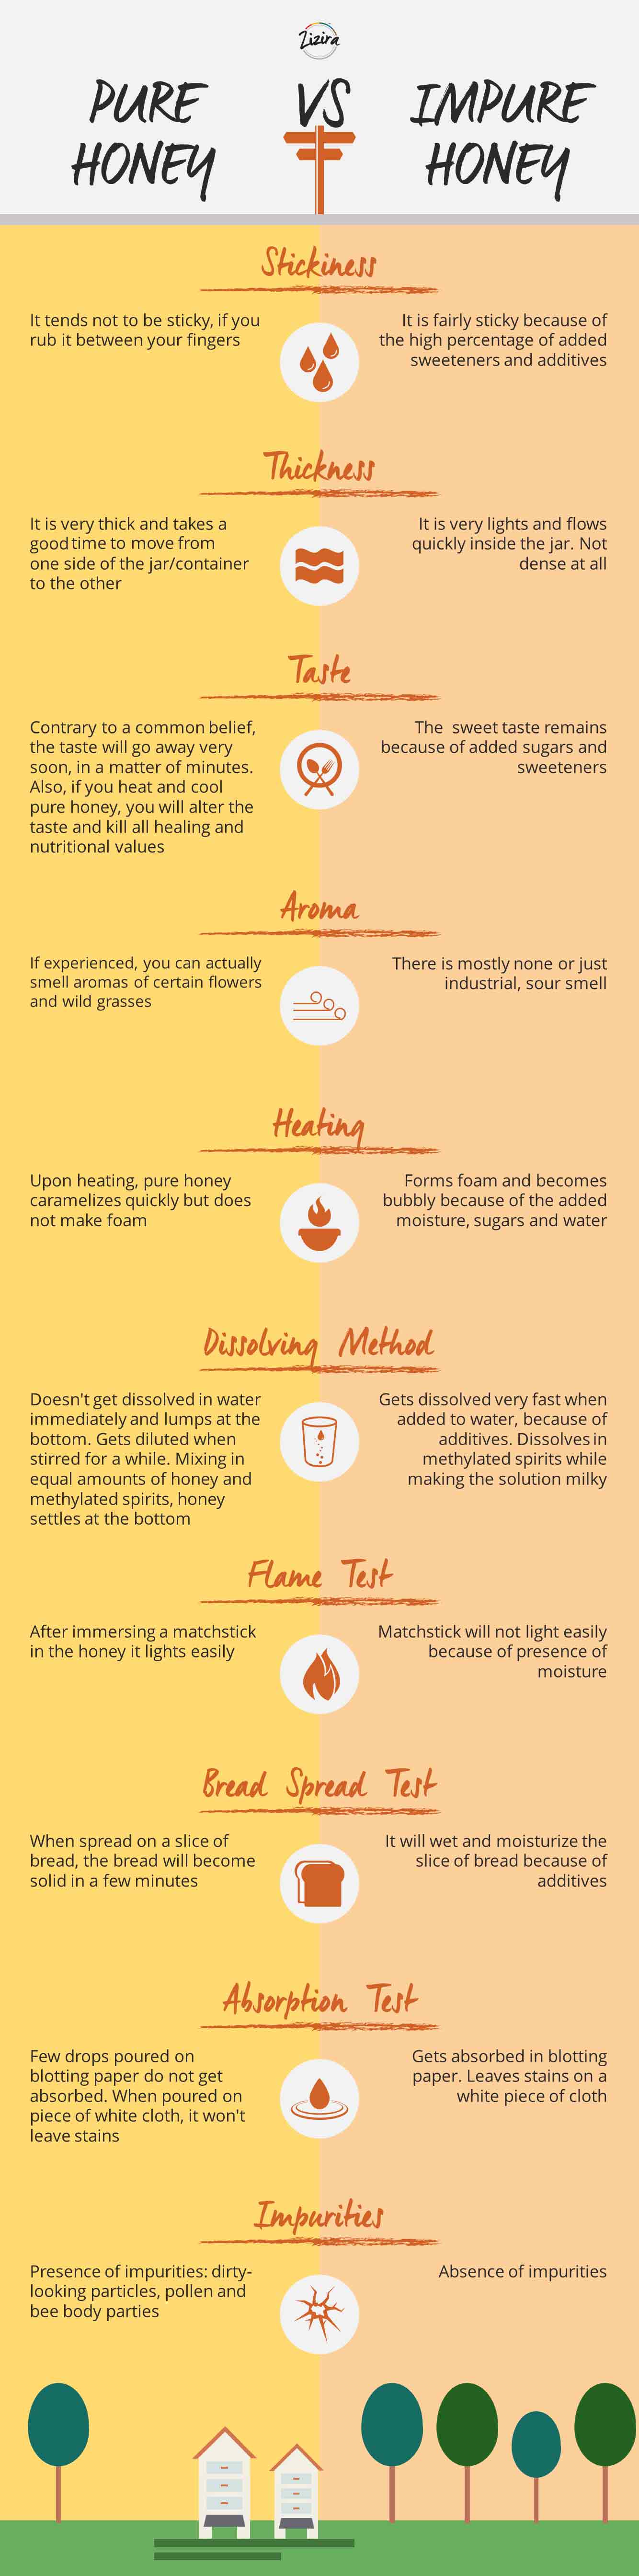 Know How to Test for Pure Honey